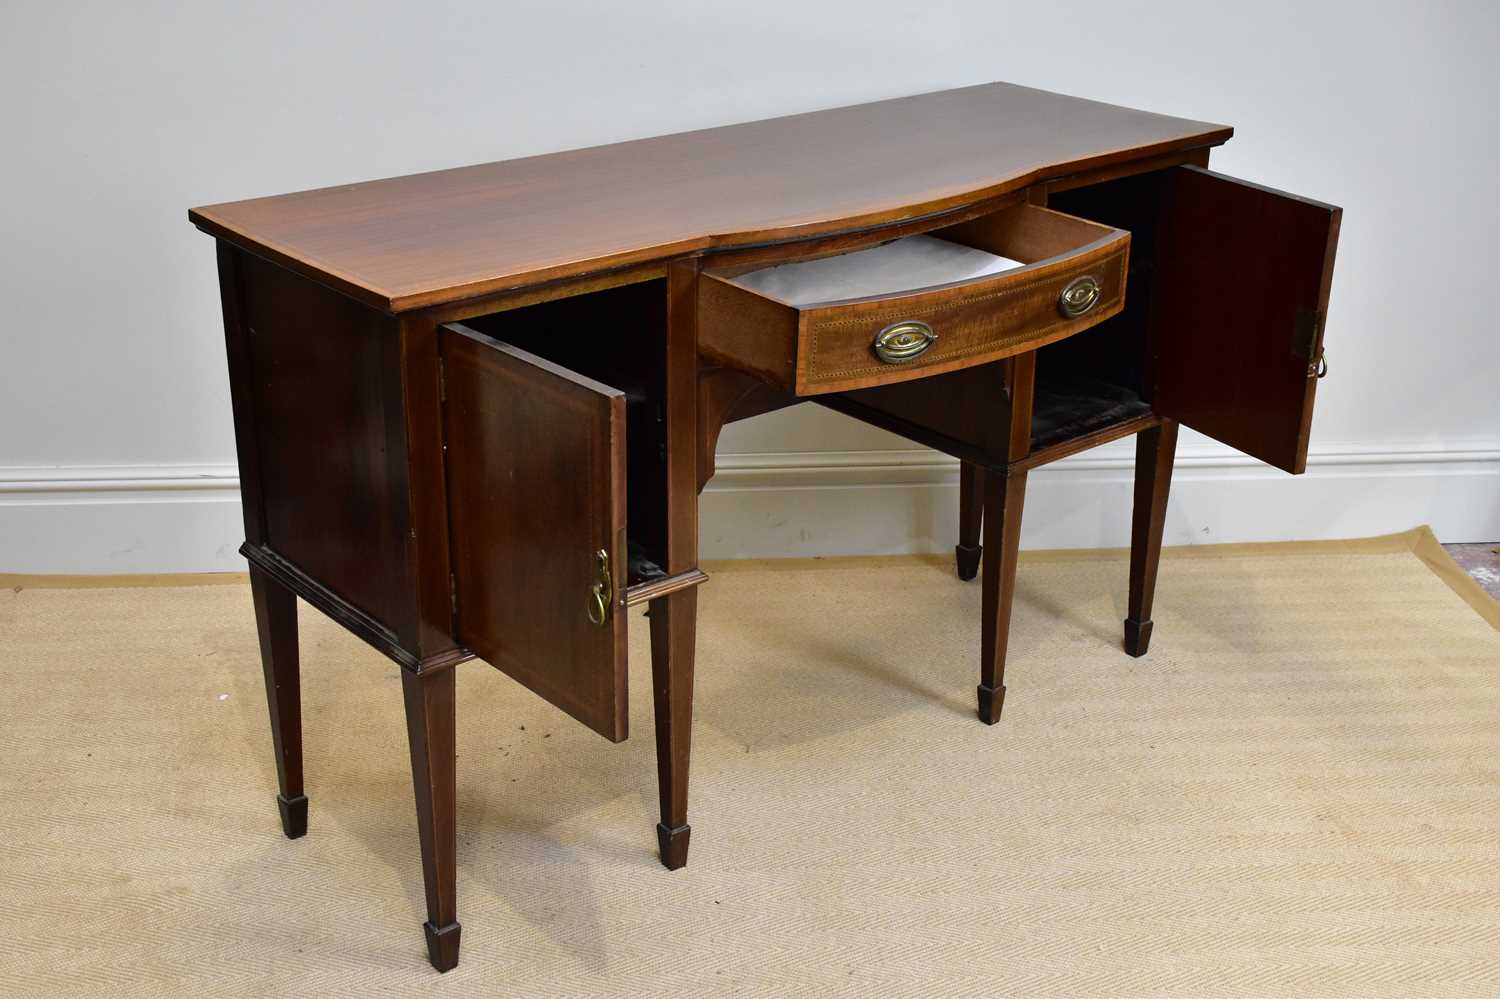 An Edwardian inlaid mahogany Sheraton Revival sideboard, with single drawer flanked by two - Image 2 of 3